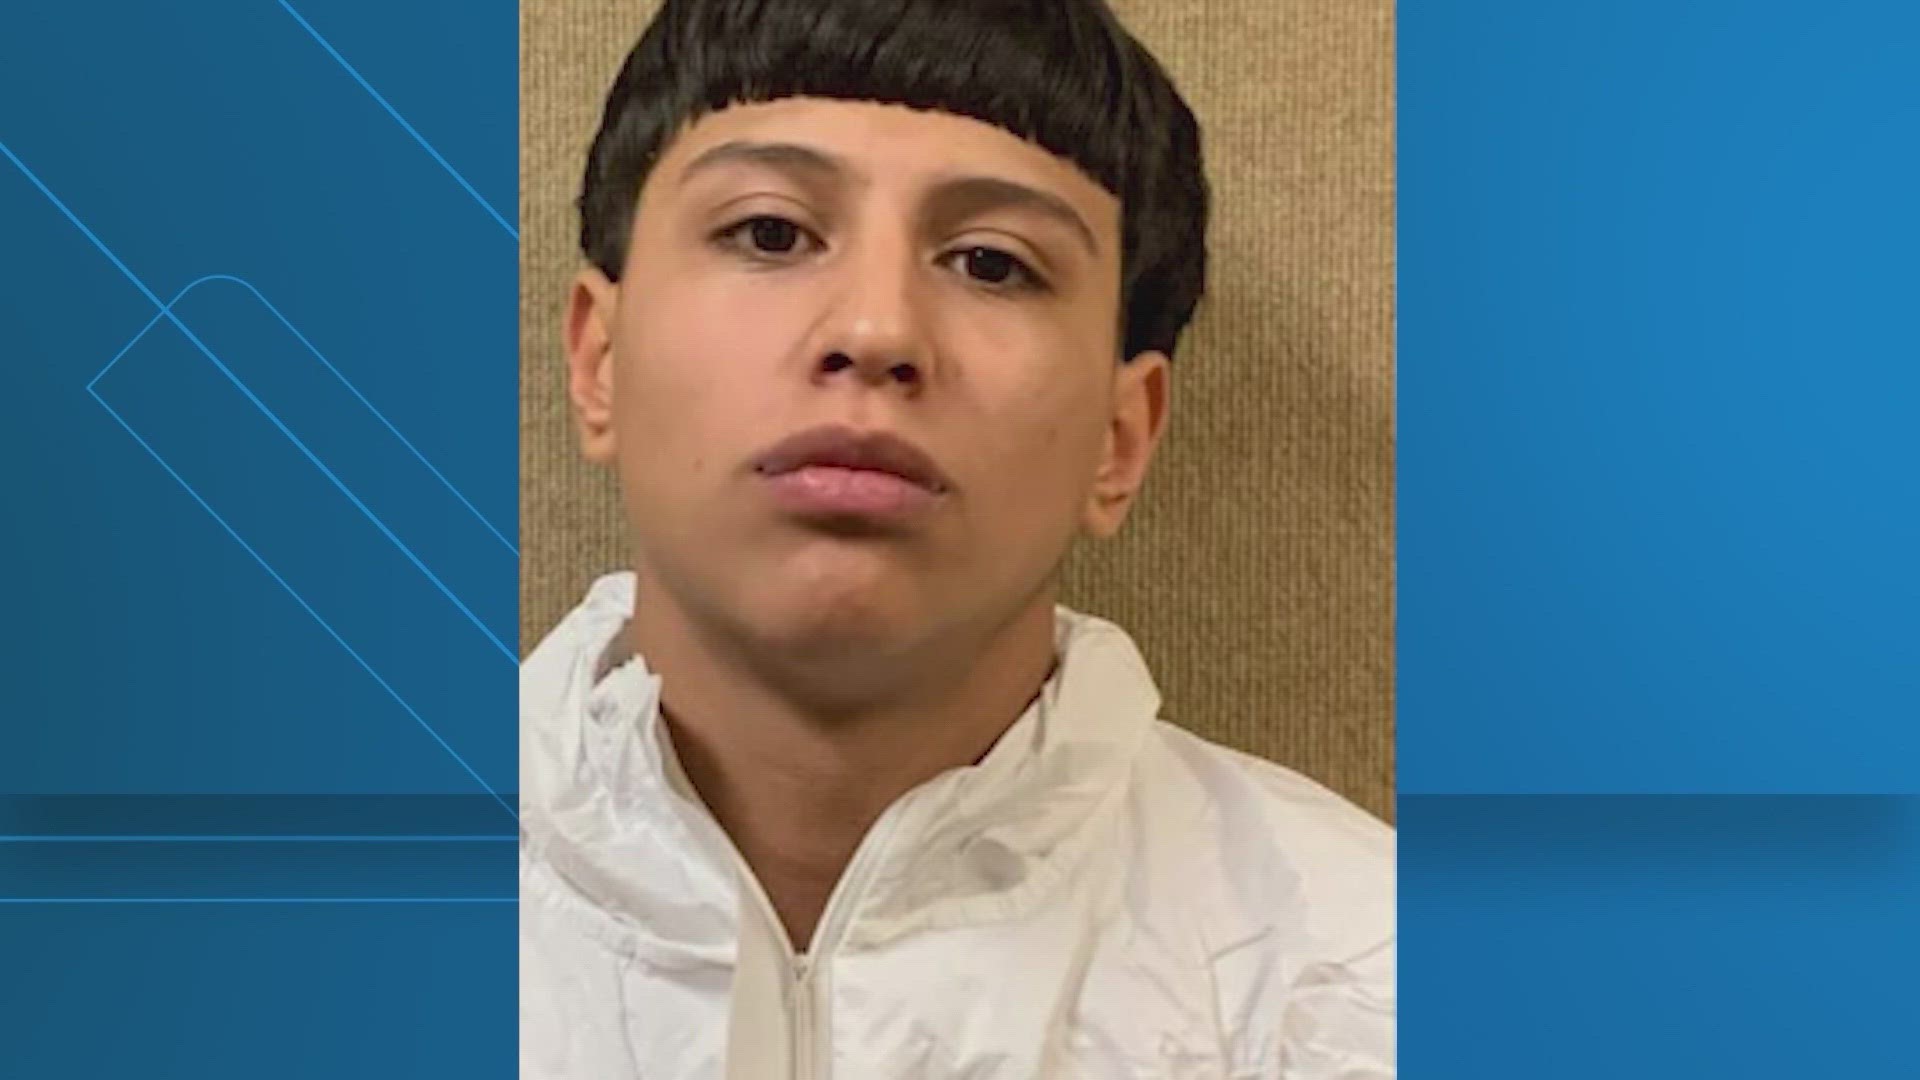 Texas teen suspected in nearly 30 aggravated robbery cases kens5 image pic